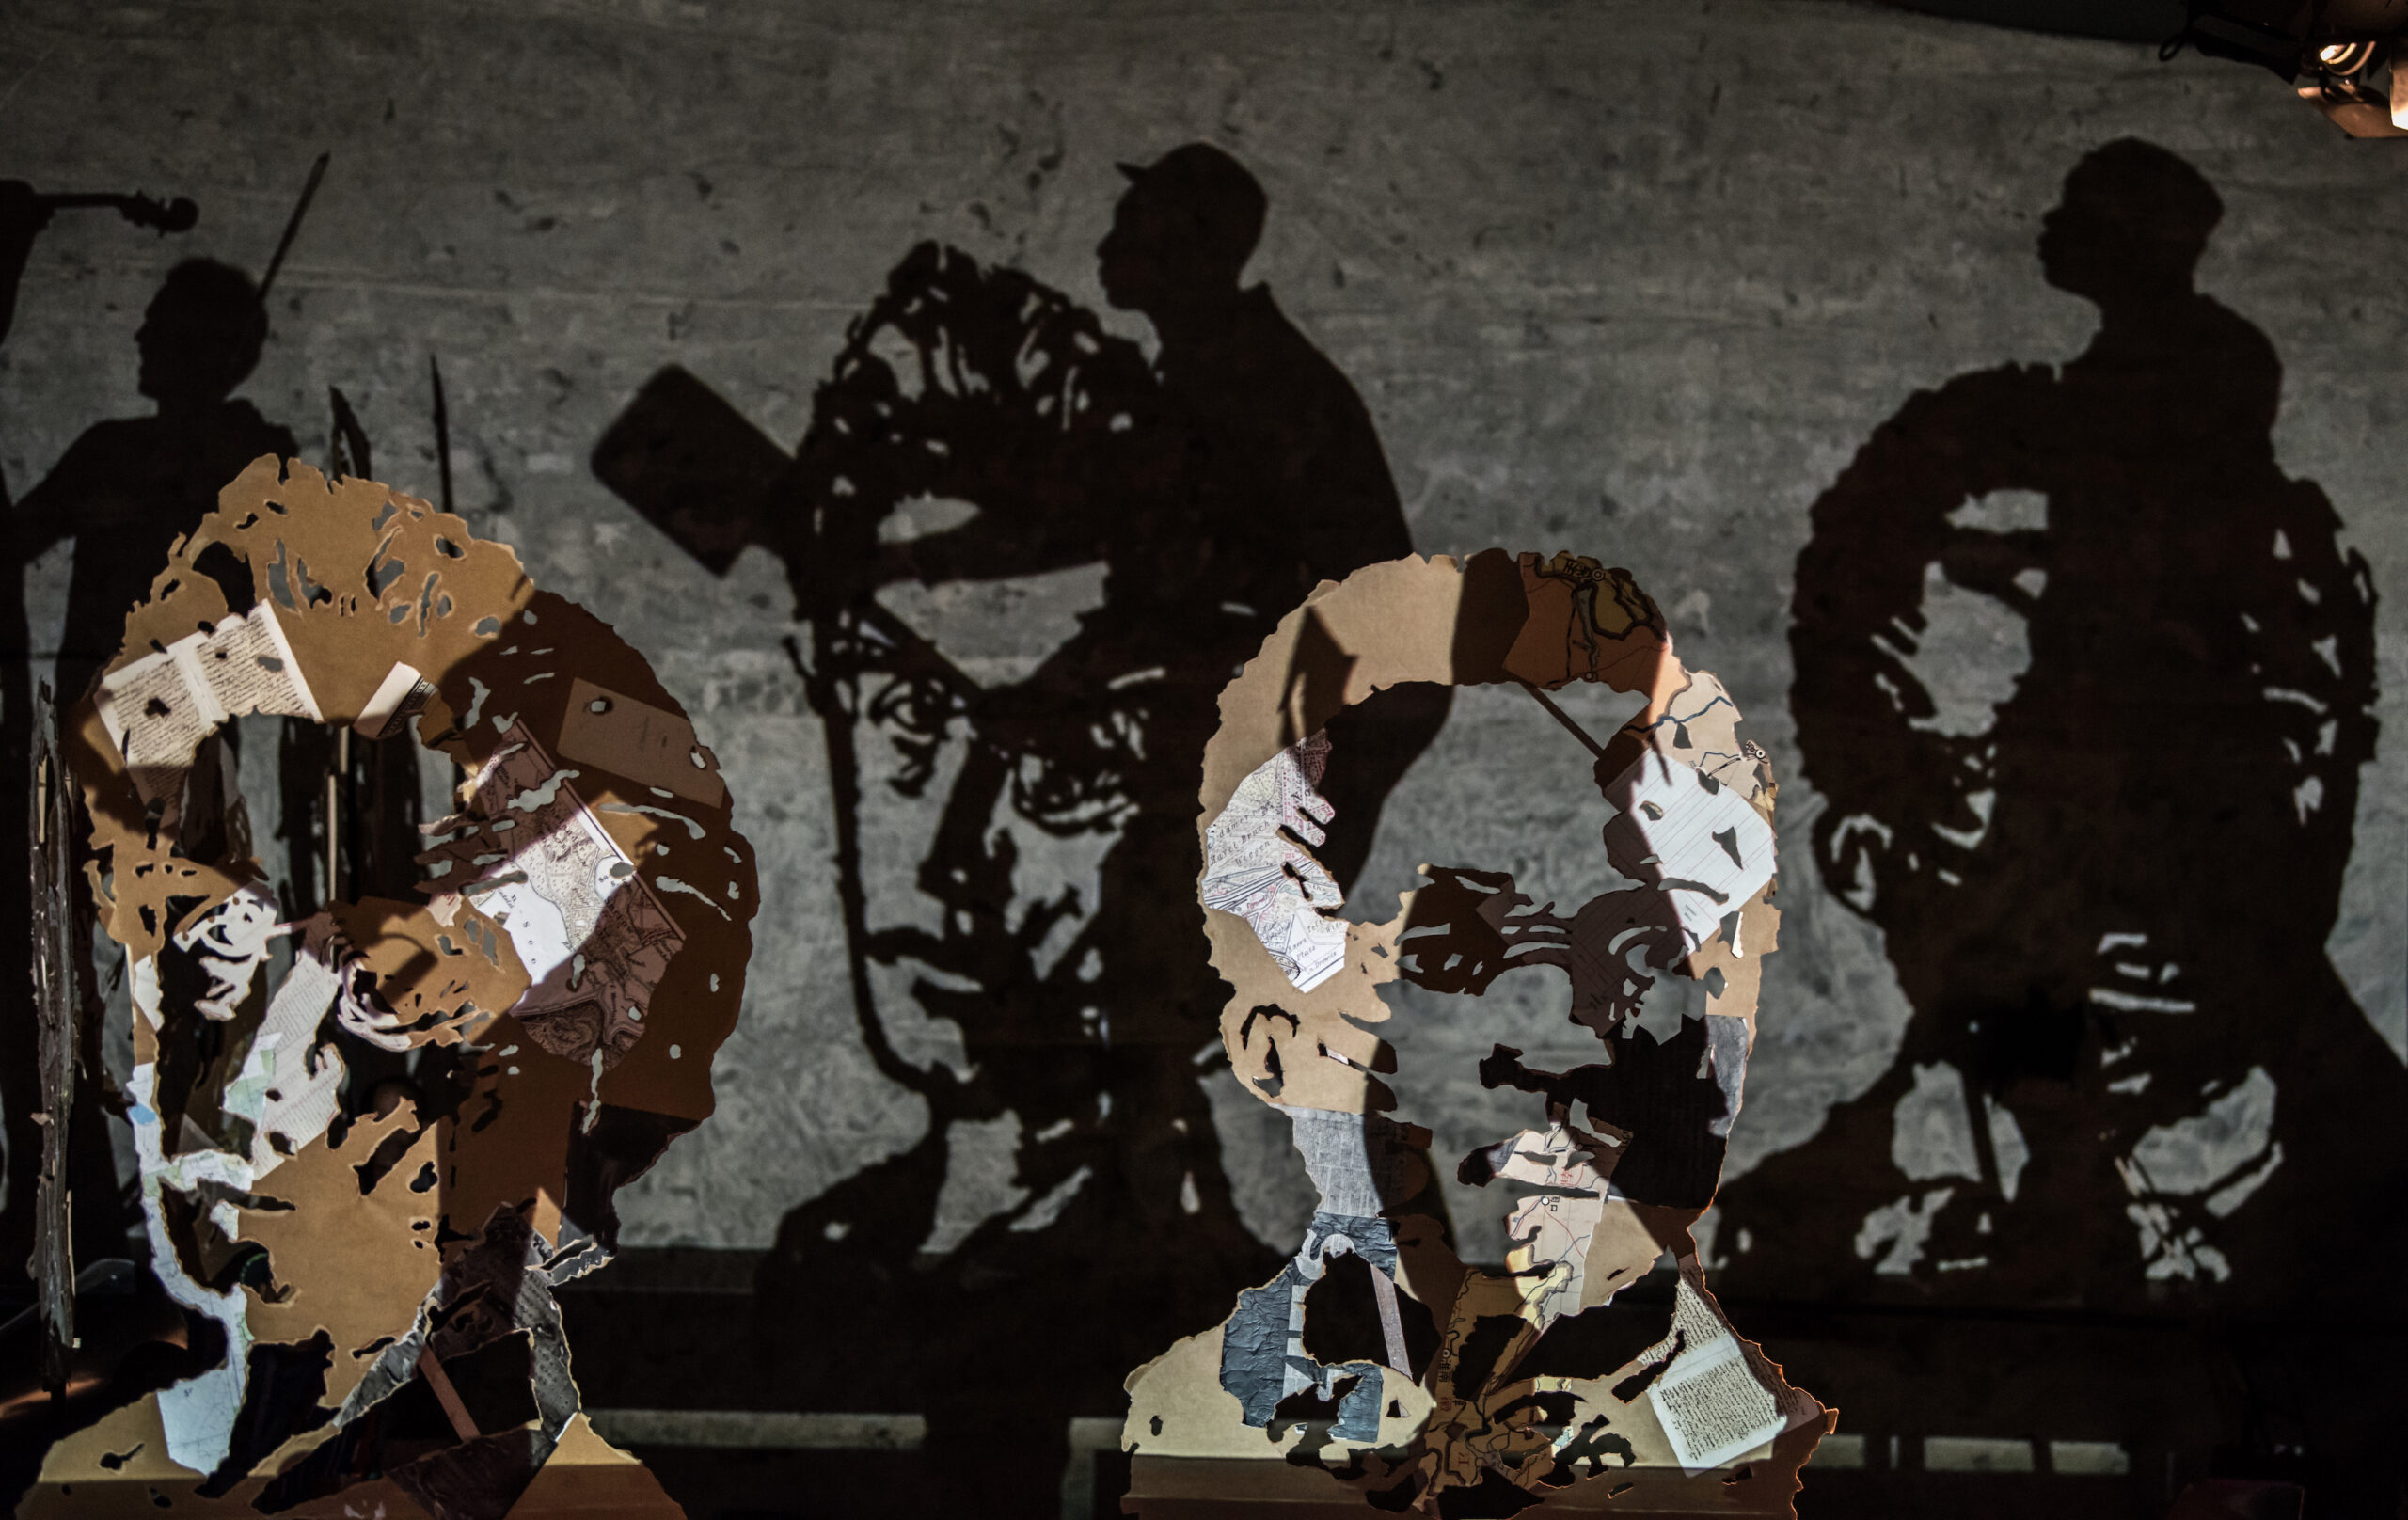 William Kentridge Studio. Projection meets installation and procession during The Head & the Load (Photo by Stephanie Berger/ Courtesy of William Kentridge Studio)